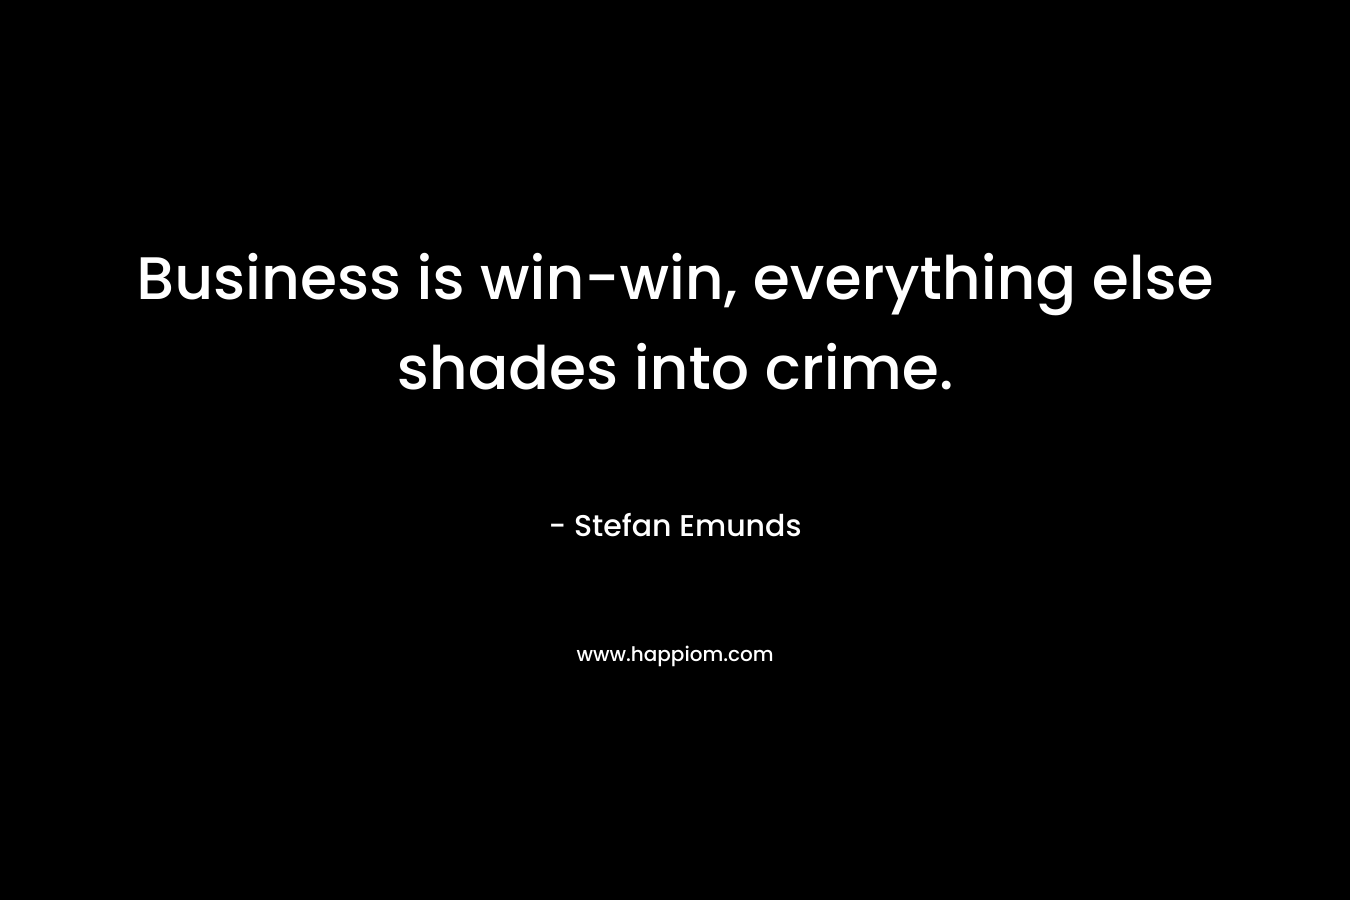 Business is win-win, everything else shades into crime. – Stefan Emunds